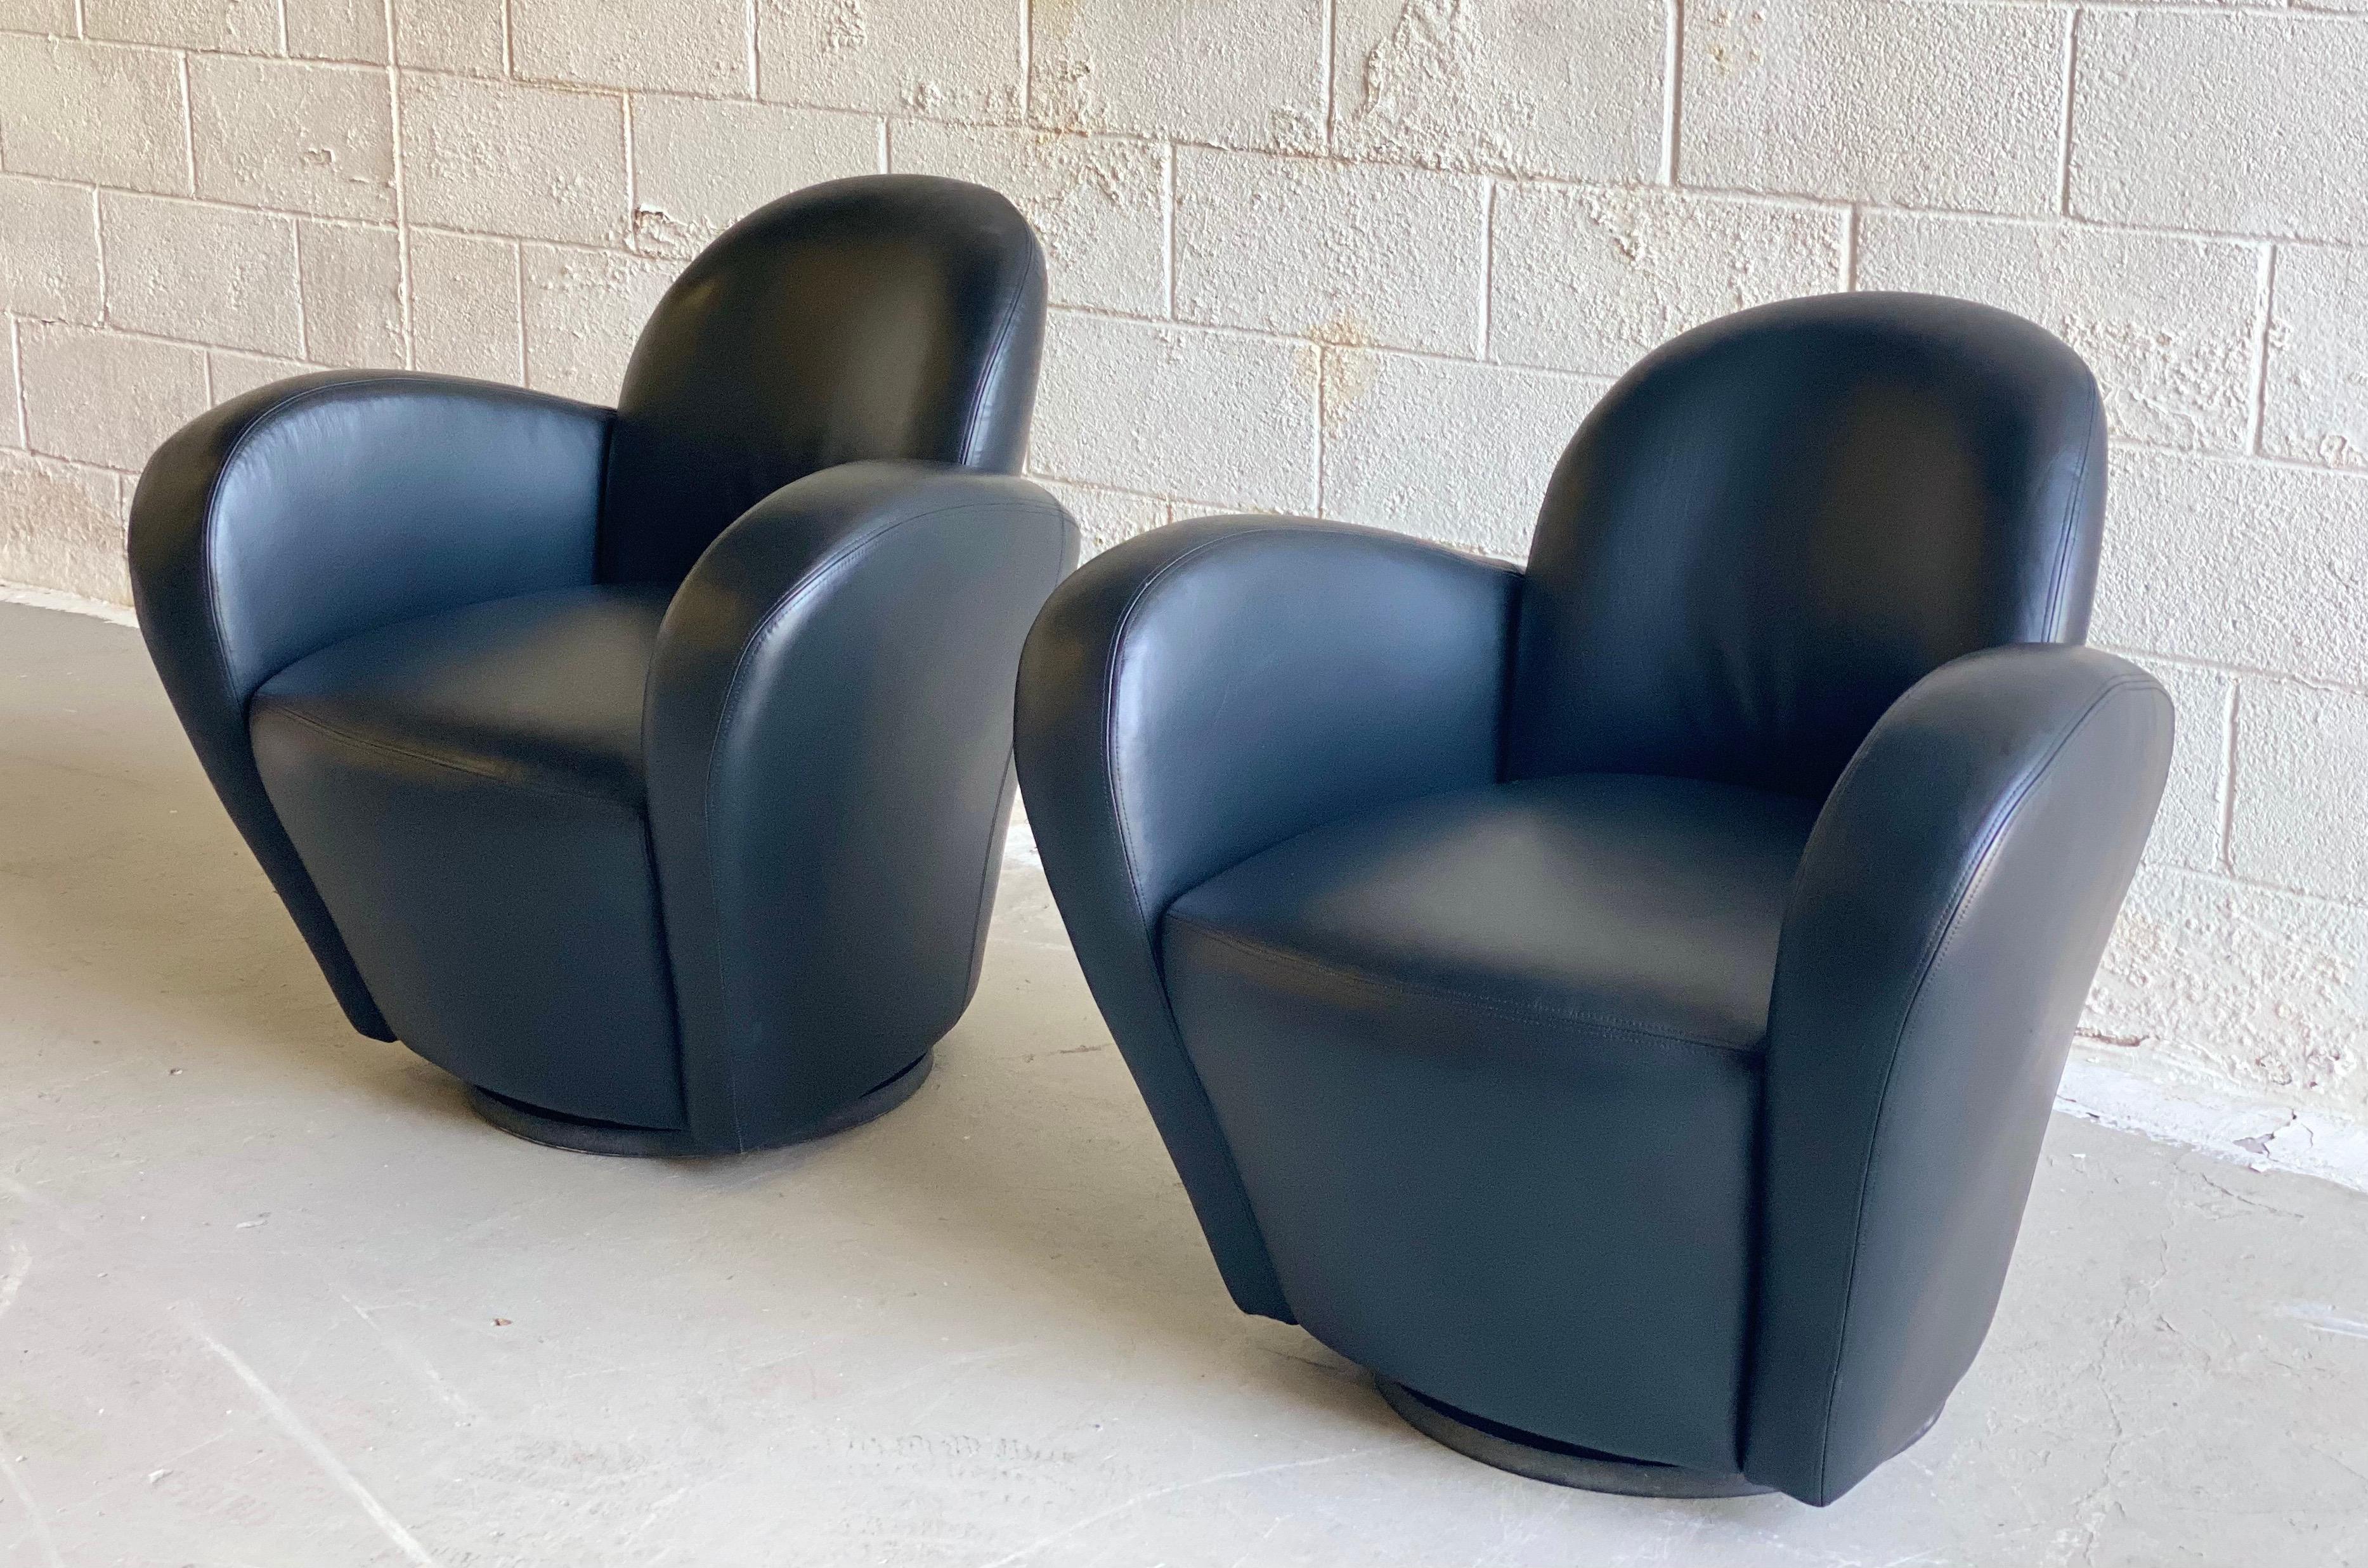 Minimalist 1990s Vintage Preview Wrap Around Barrel Swivel Chairs, Set of 4 